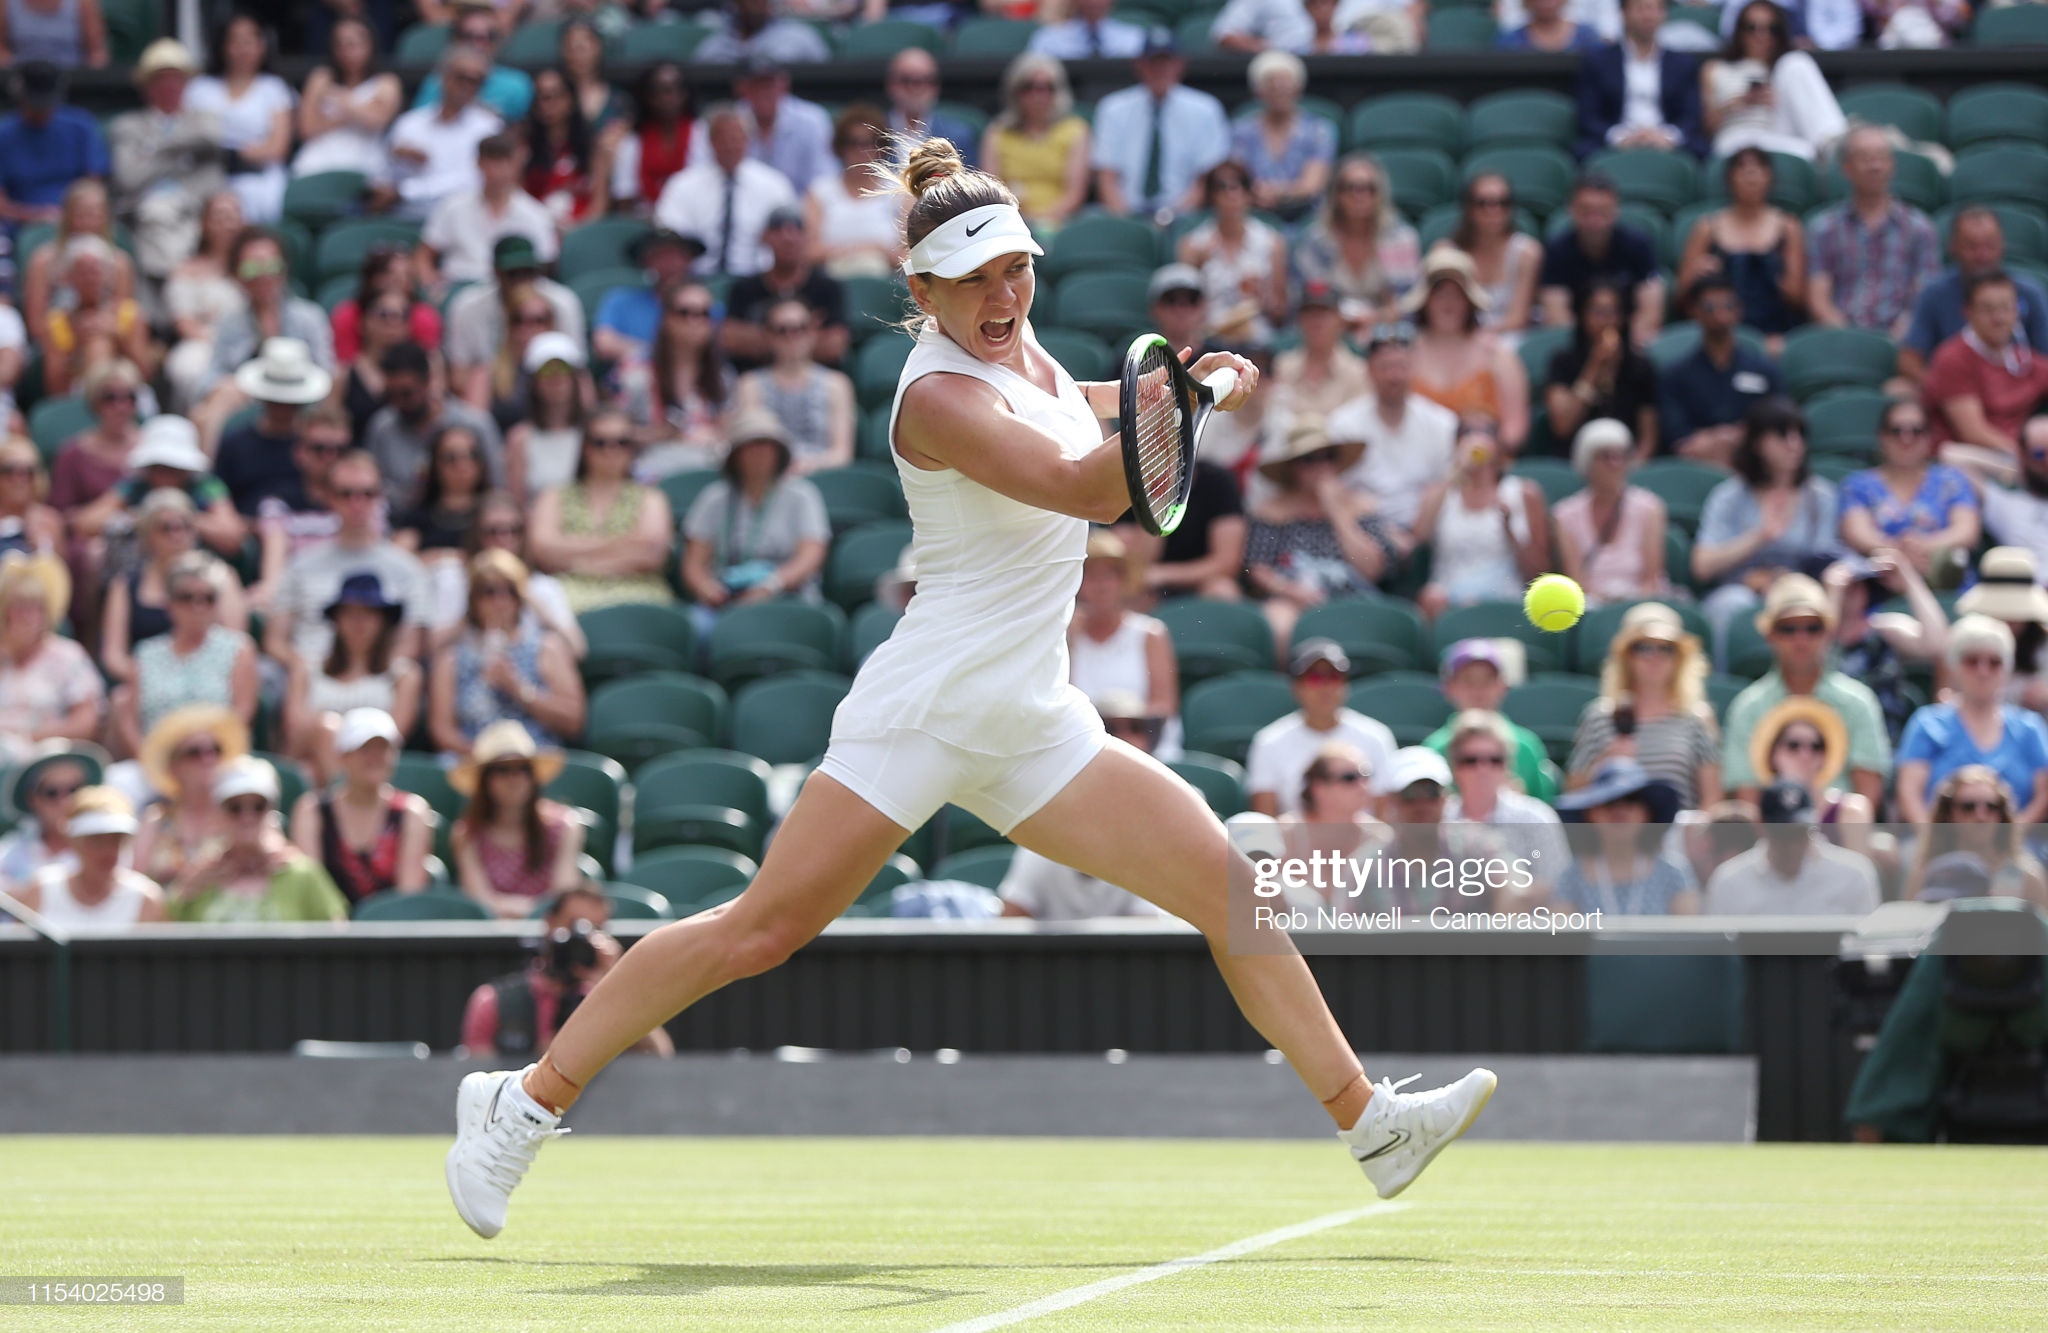 LONDON, ENGLAND - JULY 05: Simona Halep (ROU) during her match against Victoria Azarenka (BLR) in their Ladies' Singles Third Round match during Day 5 of The Championships - Wimbledon 2019 at All England Lawn Tennis and Croquet Club on July 5, 2019 in London, England. (Photo by Rob Newell - CameraSport via Getty Images)